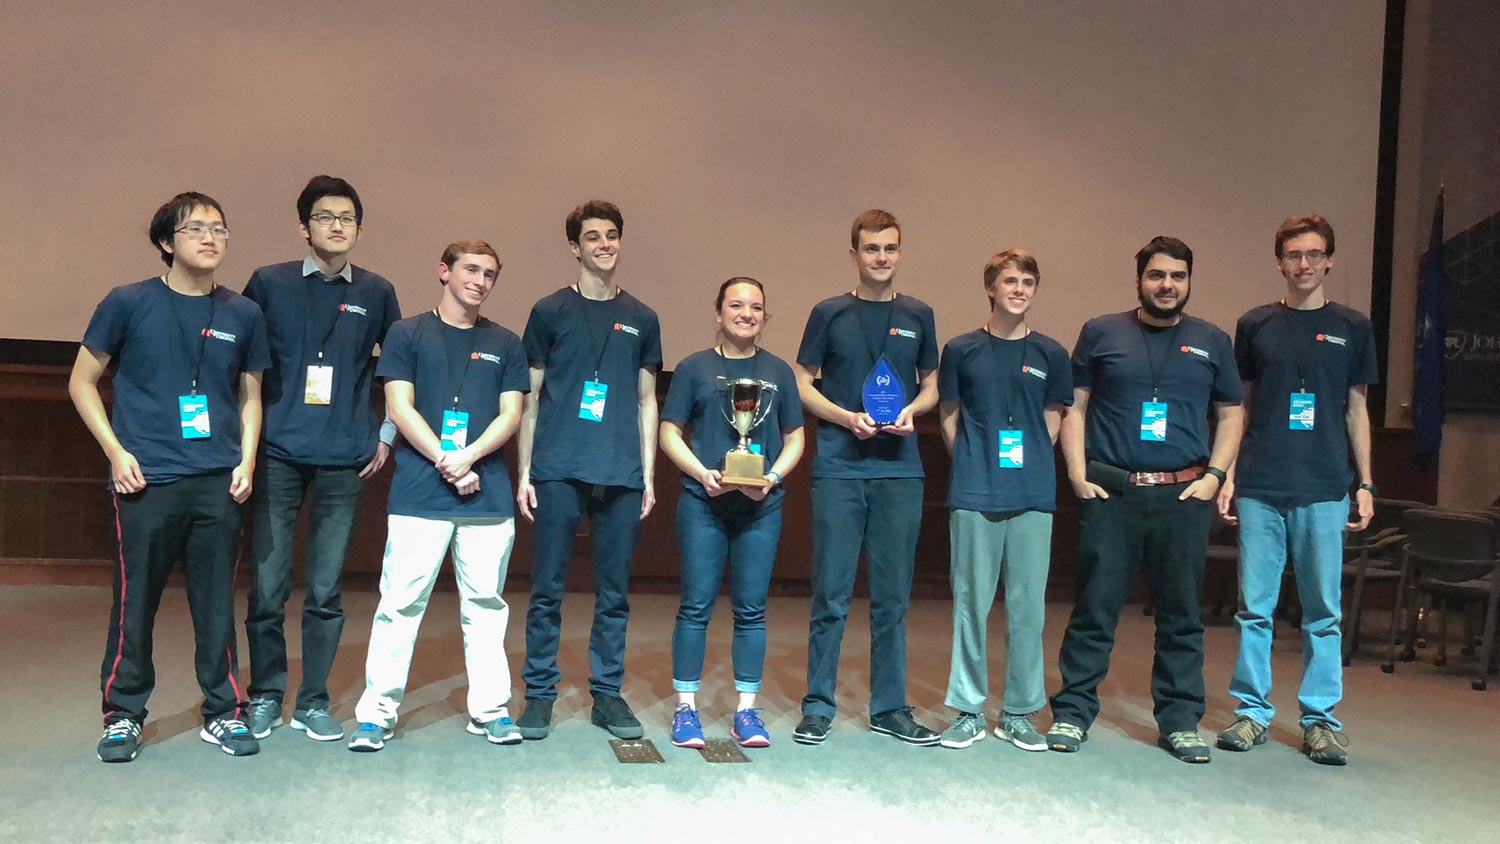  UVA cyber defense team holds their trophies on stage